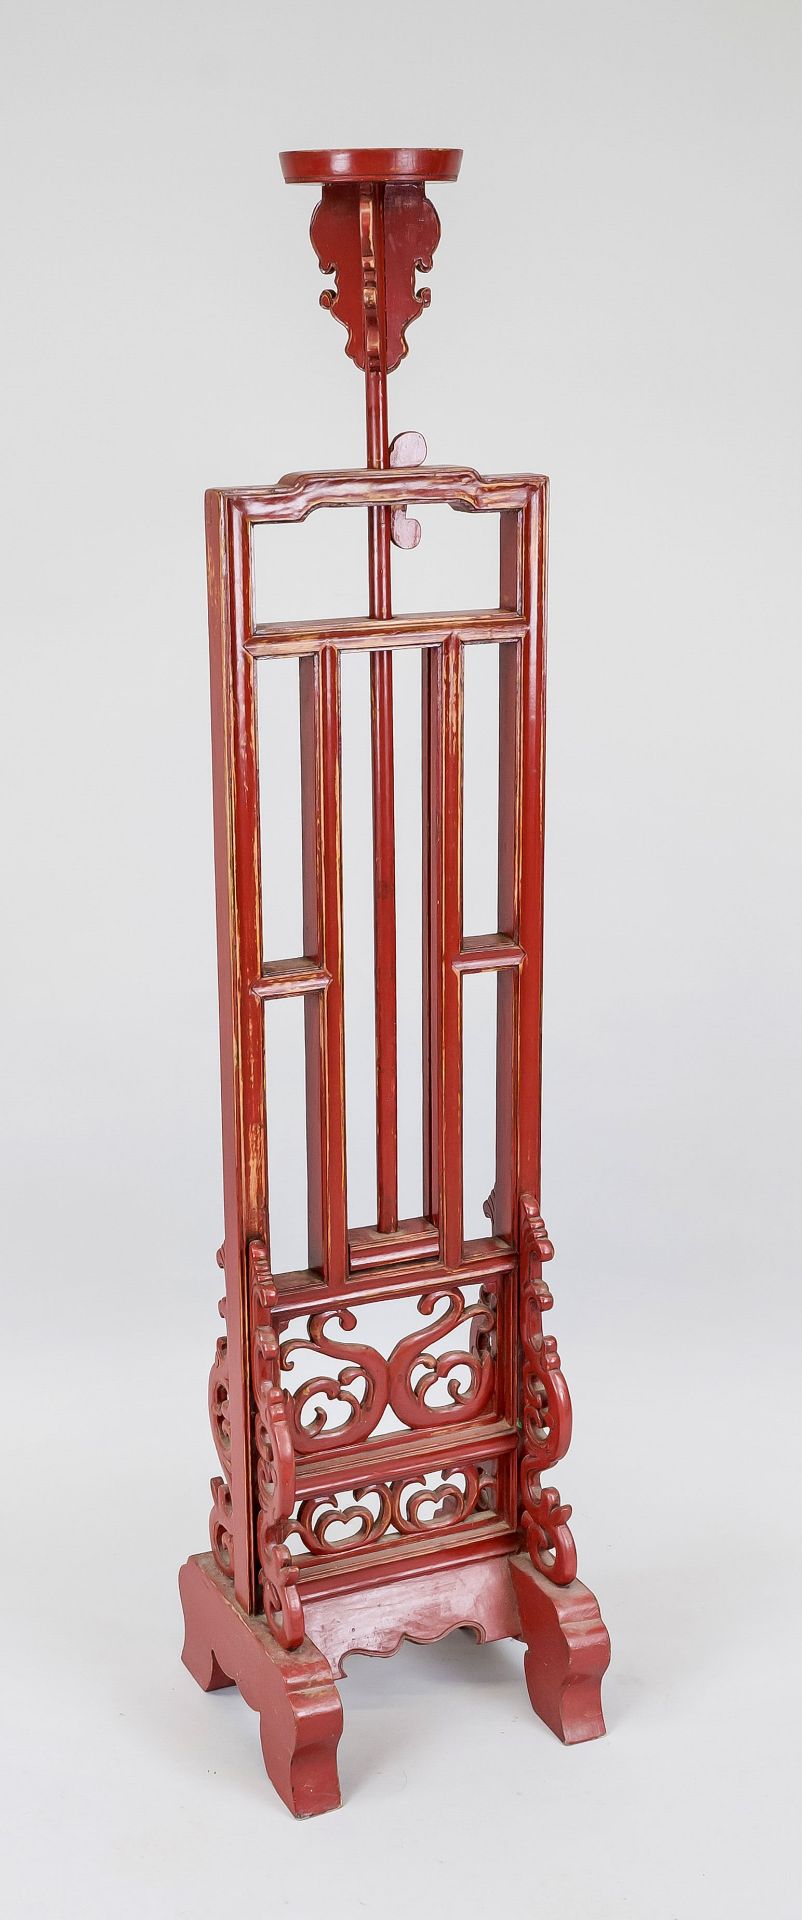 Large candlestick, China, c. 1900, wood with red lacquer. Openwork stand with carved tendrils.